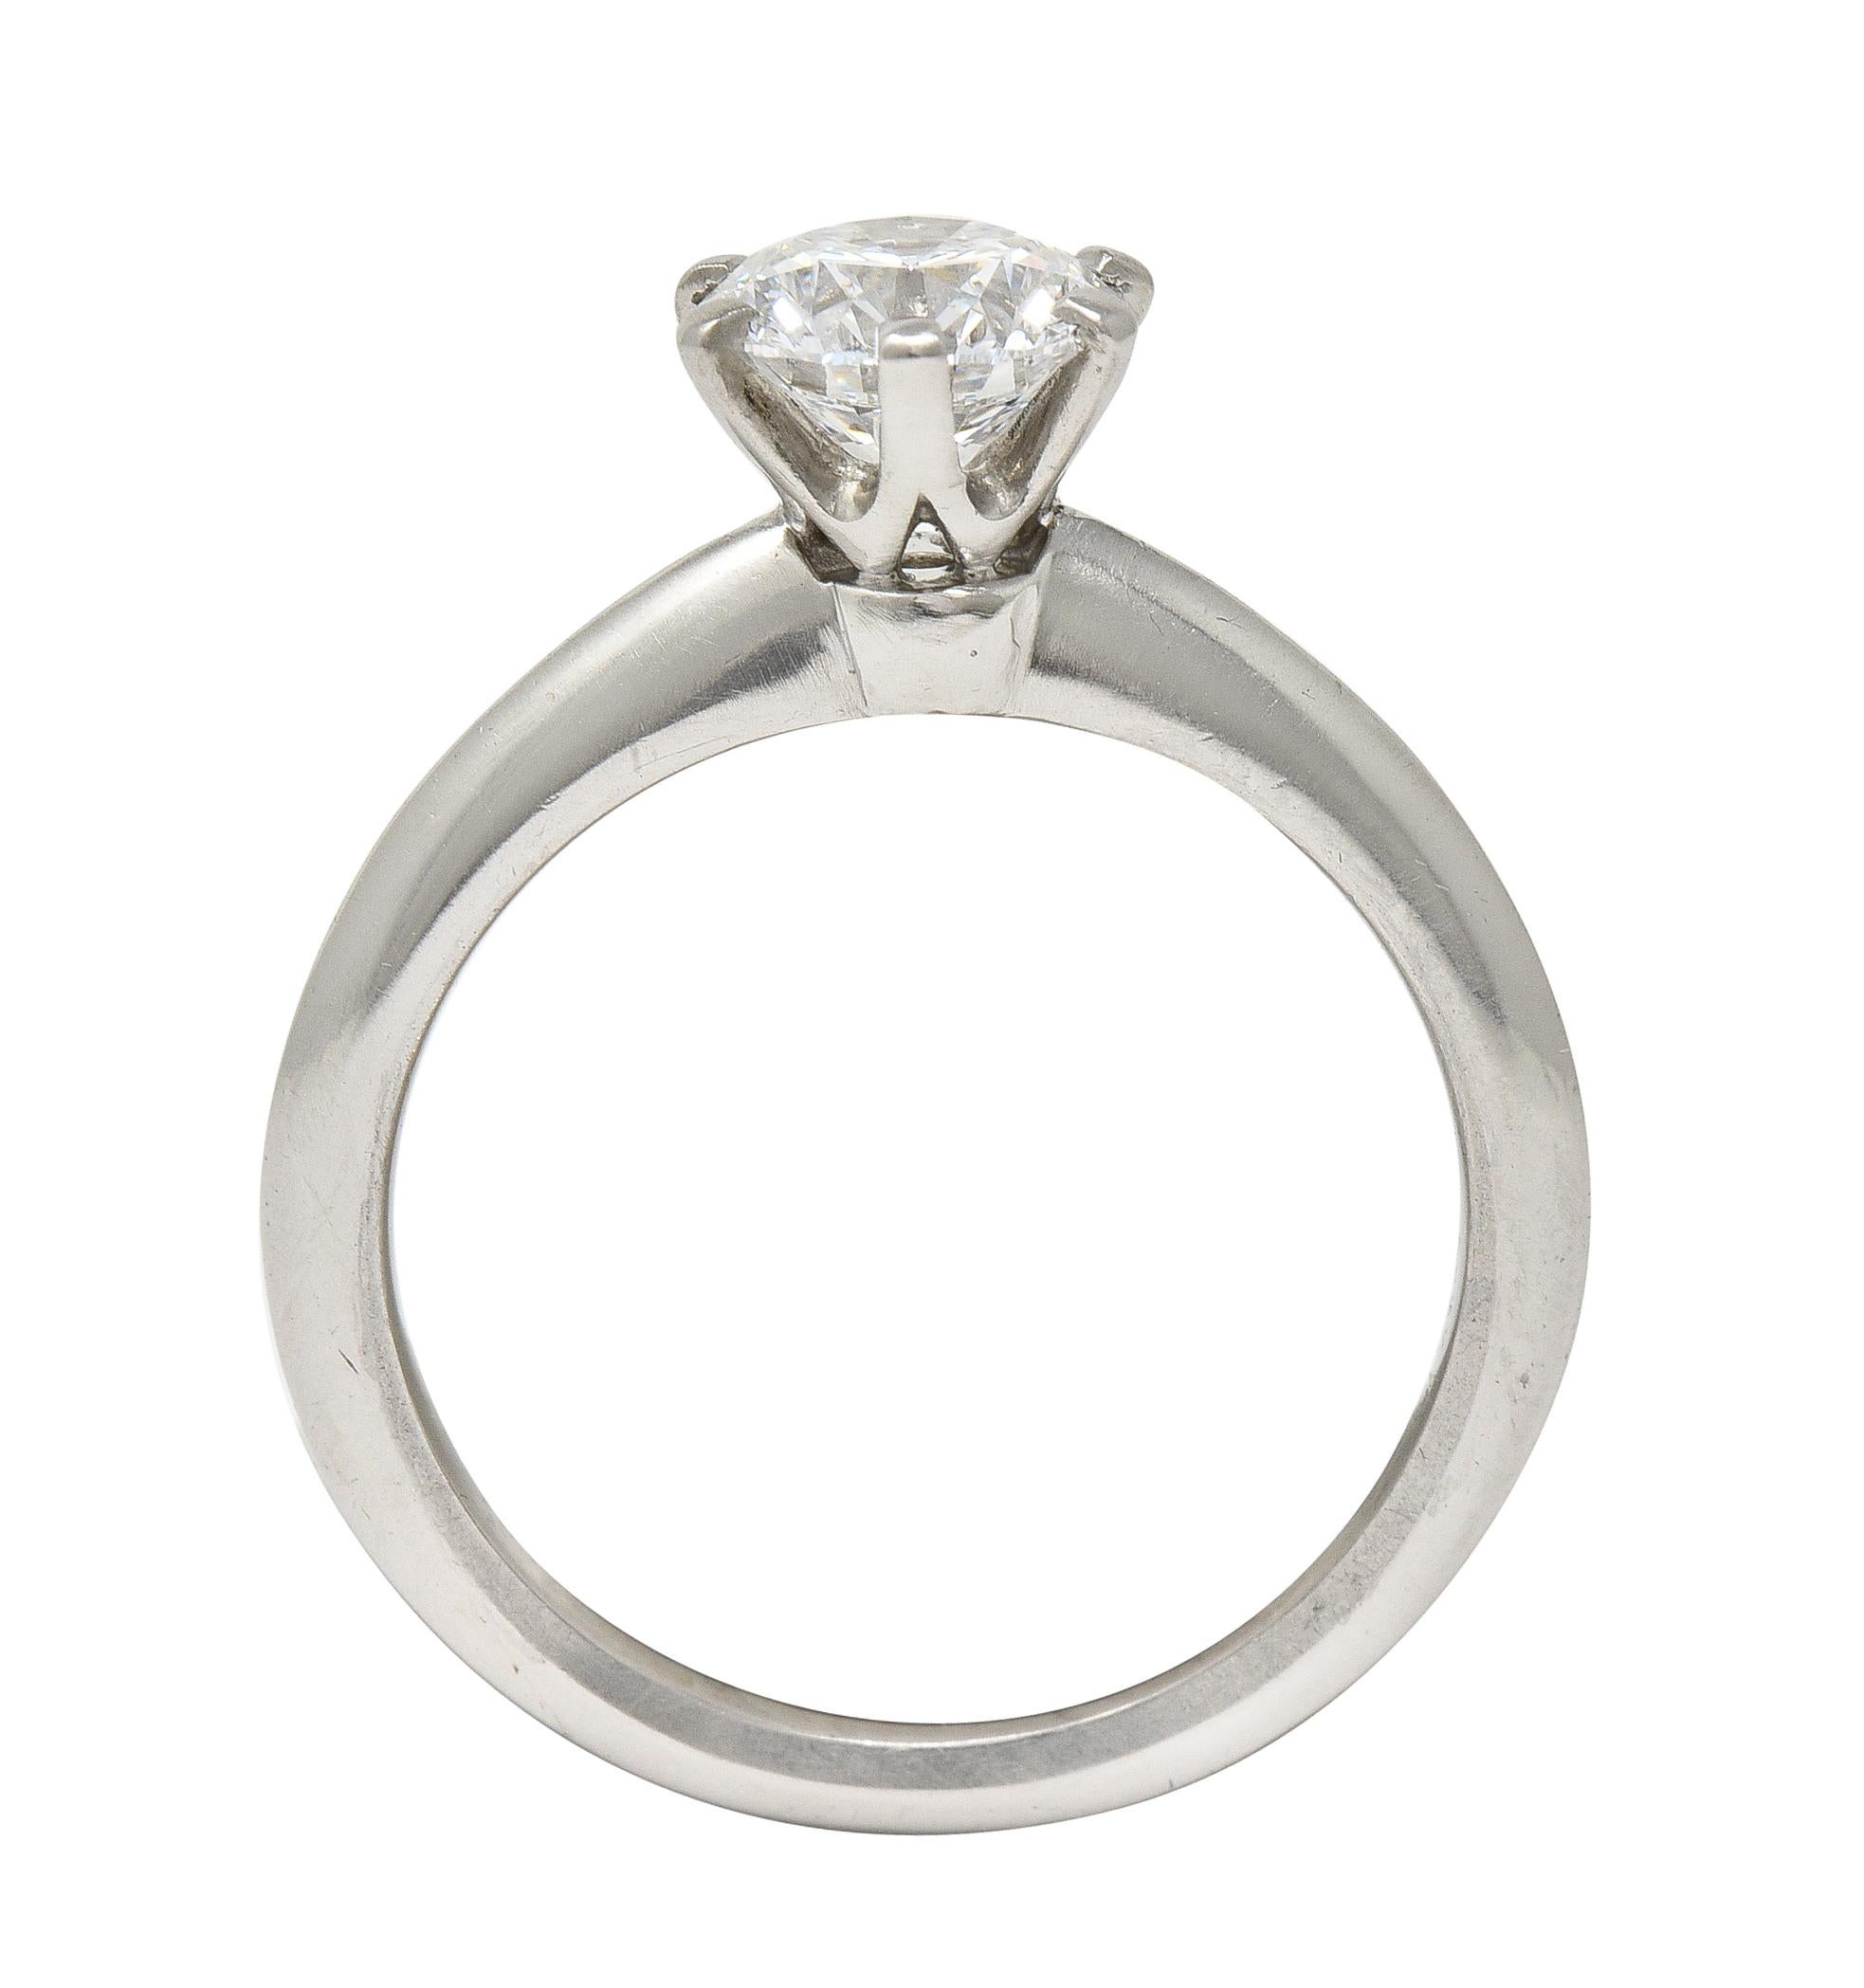 Tiffany & Co. Mid-Century 1.06 CTW Transitional Cut Diamond Engagement Ring GIA For Sale 7